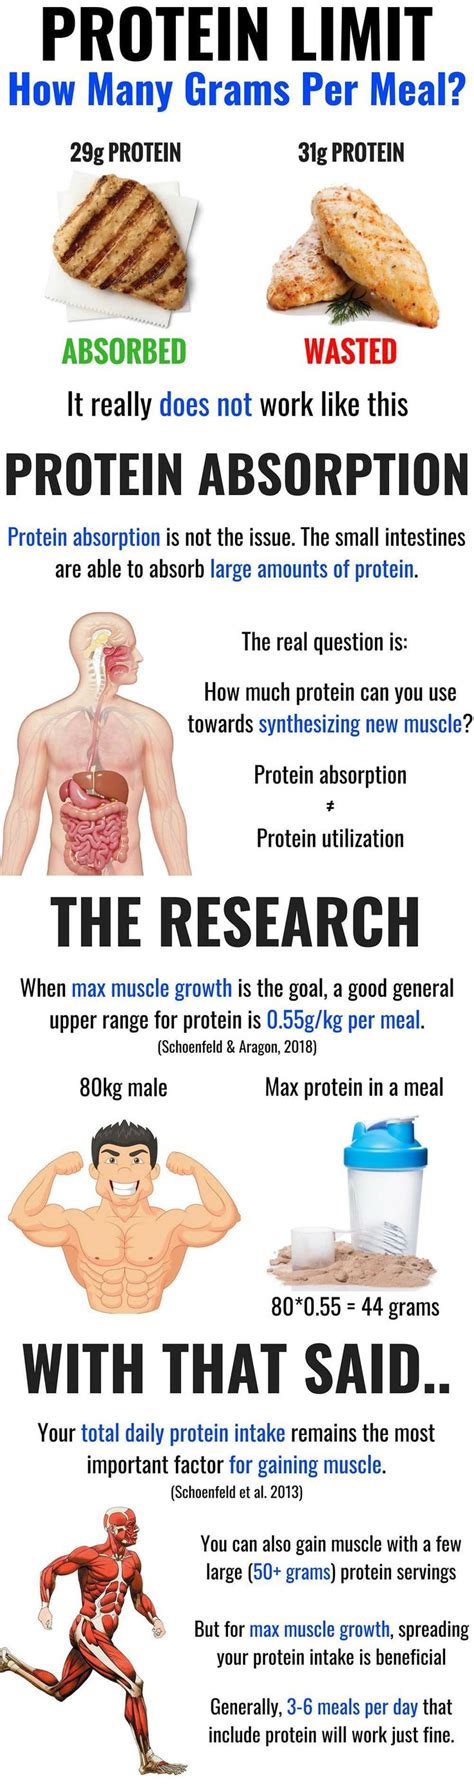 How much protein can a body absorb?